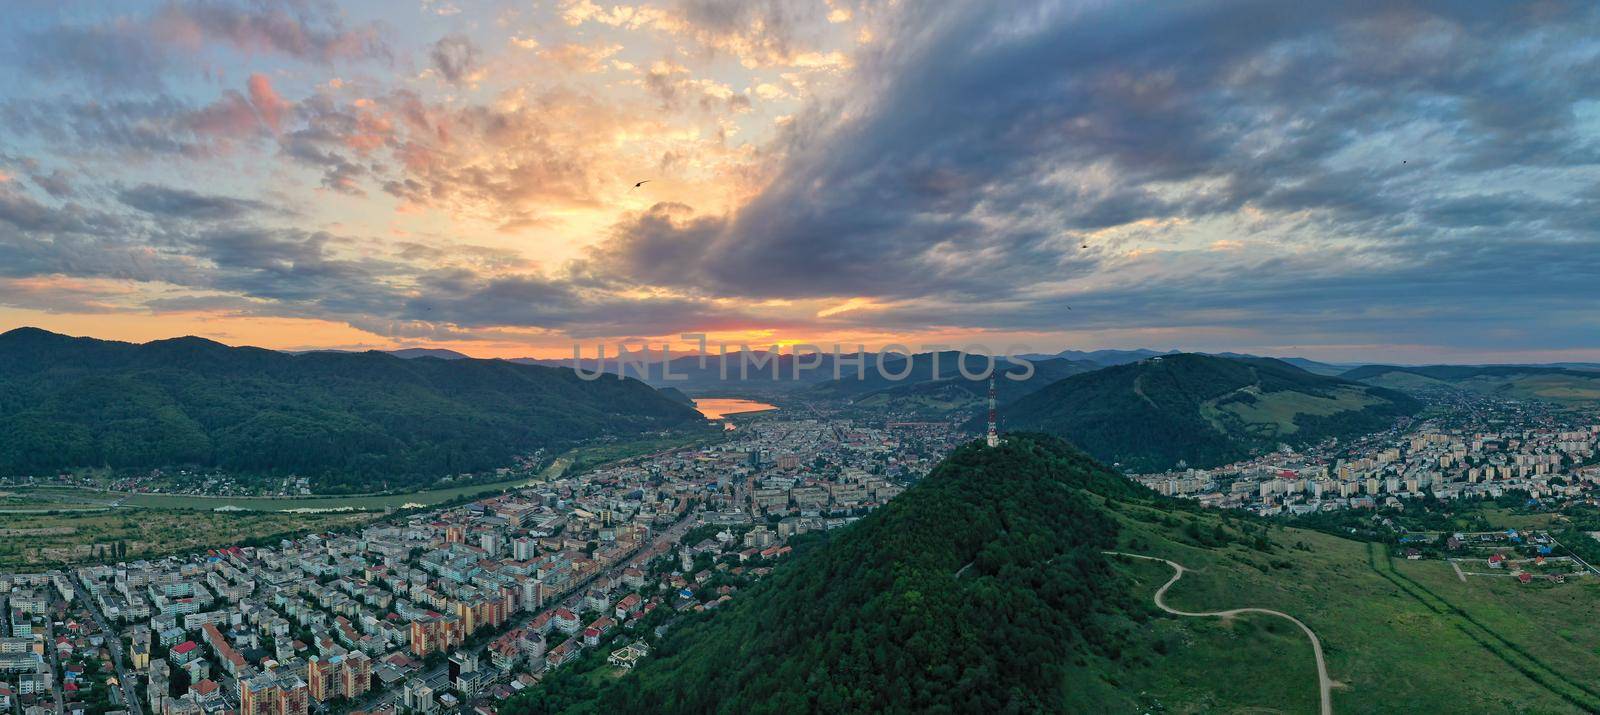 Aerial sunset and green mountain city by savcoco